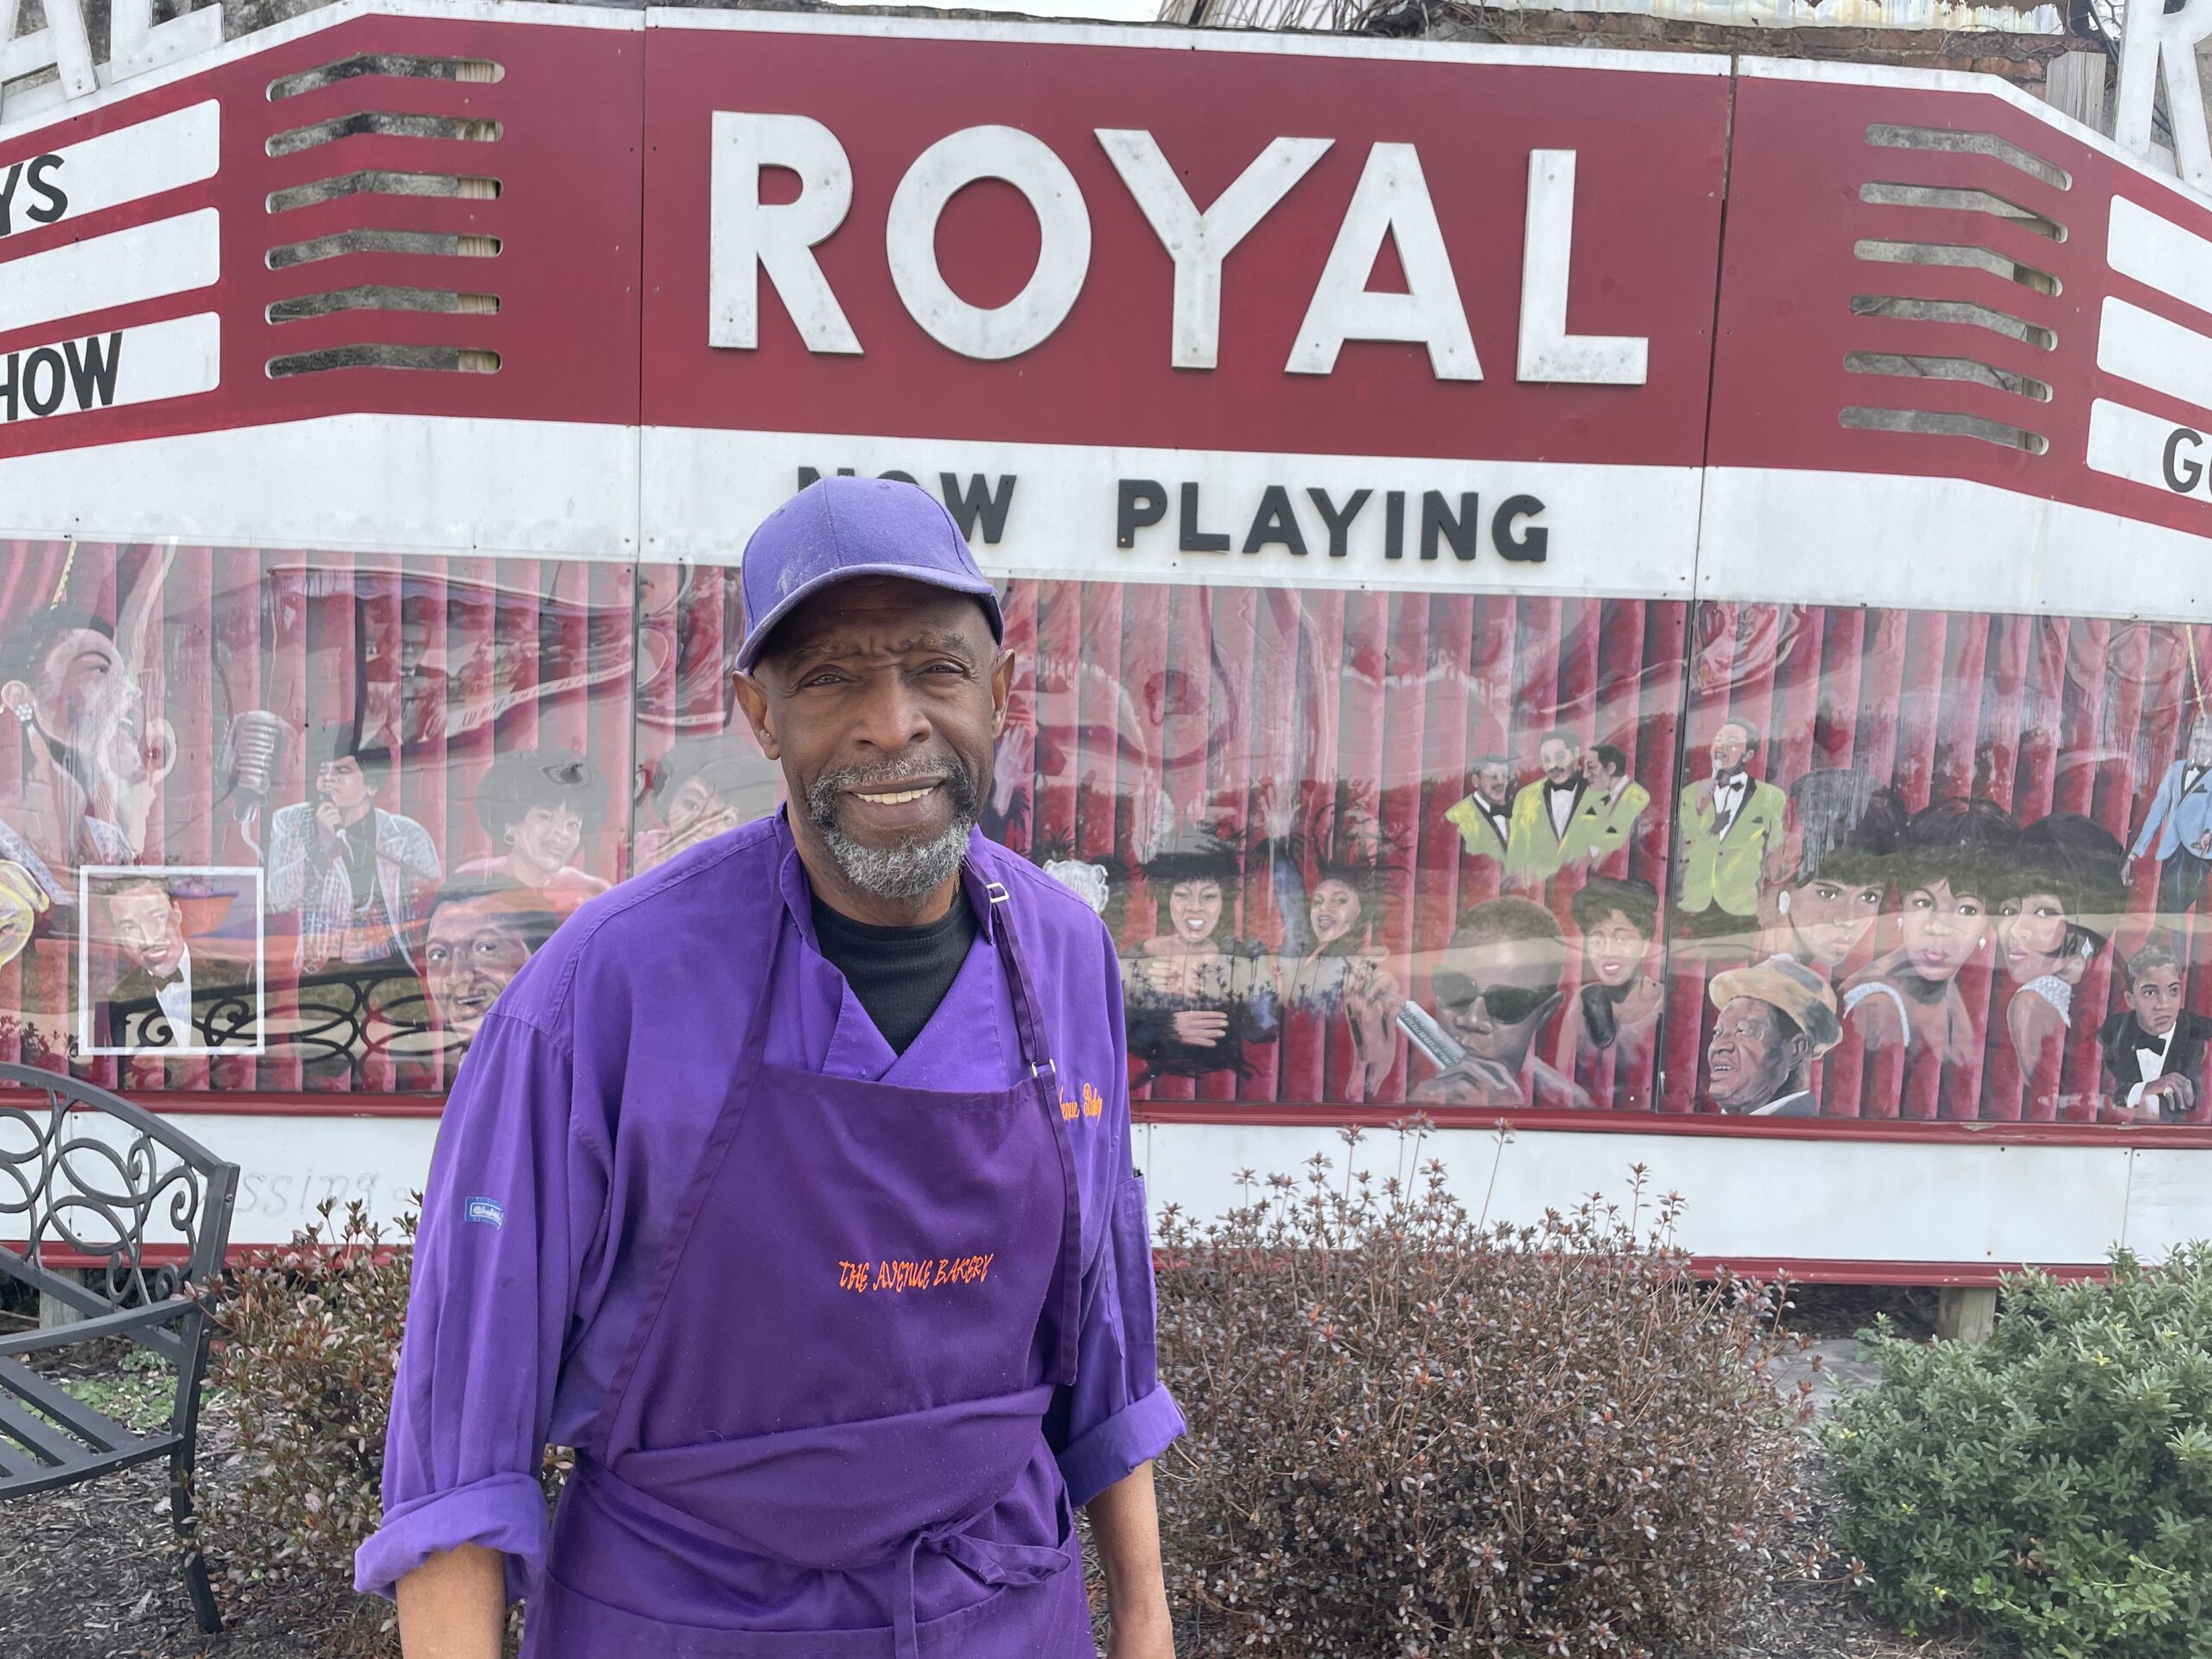 James Hamlin, owner of The Avenue Bakery located on Pennsylvania Avenue, standing in front of a "Royal Theatre" mural outside of his bakery.